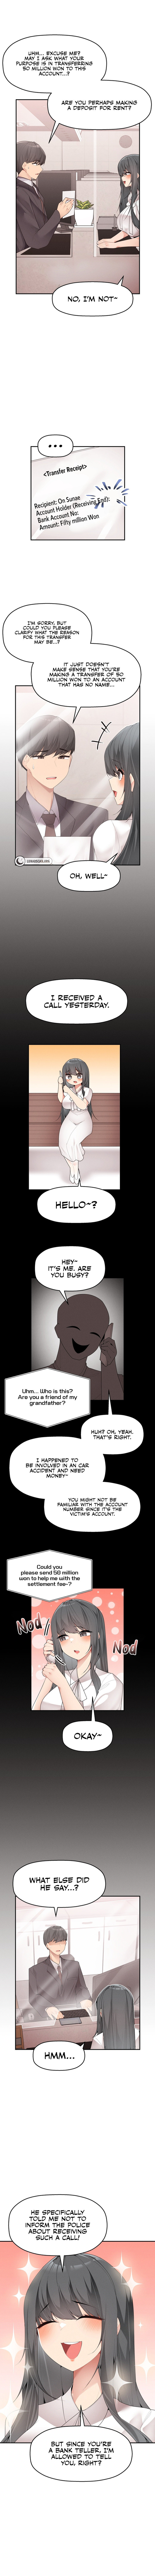 More Than Each Other - Chapter 1 Page 6